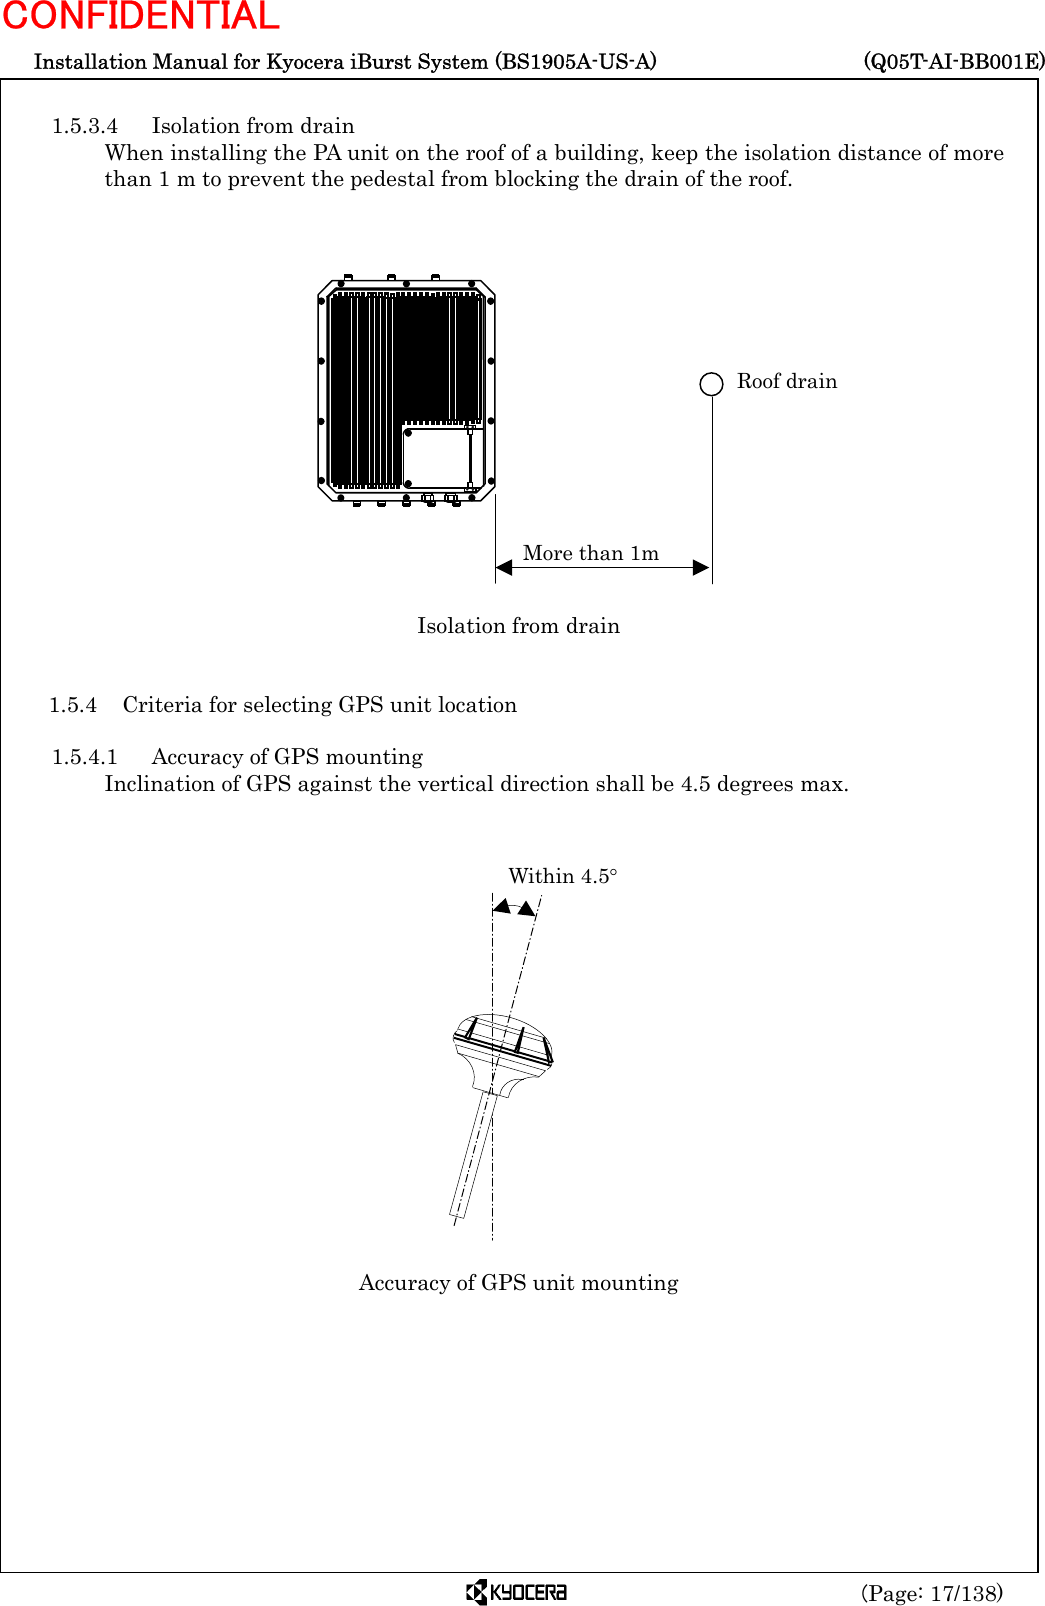  Installation Manual for Kyocera iBurst System (BS1905A-US-A)     (Q05T-AI-BB001E) (Page: 17/138) CONFIDENTIAL  1.5.3.4  Isolation from drain When installing the PA unit on the roof of a building, keep the isolation distance of more than 1 m to prevent the pedestal from blocking the drain of the roof.                 Isolation from drain   1.5.4  Criteria for selecting GPS unit location  1.5.4.1  Accuracy of GPS mounting Inclination of GPS against the vertical direction shall be 4.5 degrees max.                                   Accuracy of GPS unit mounting        More than 1m Roof drain Within 4.5° 